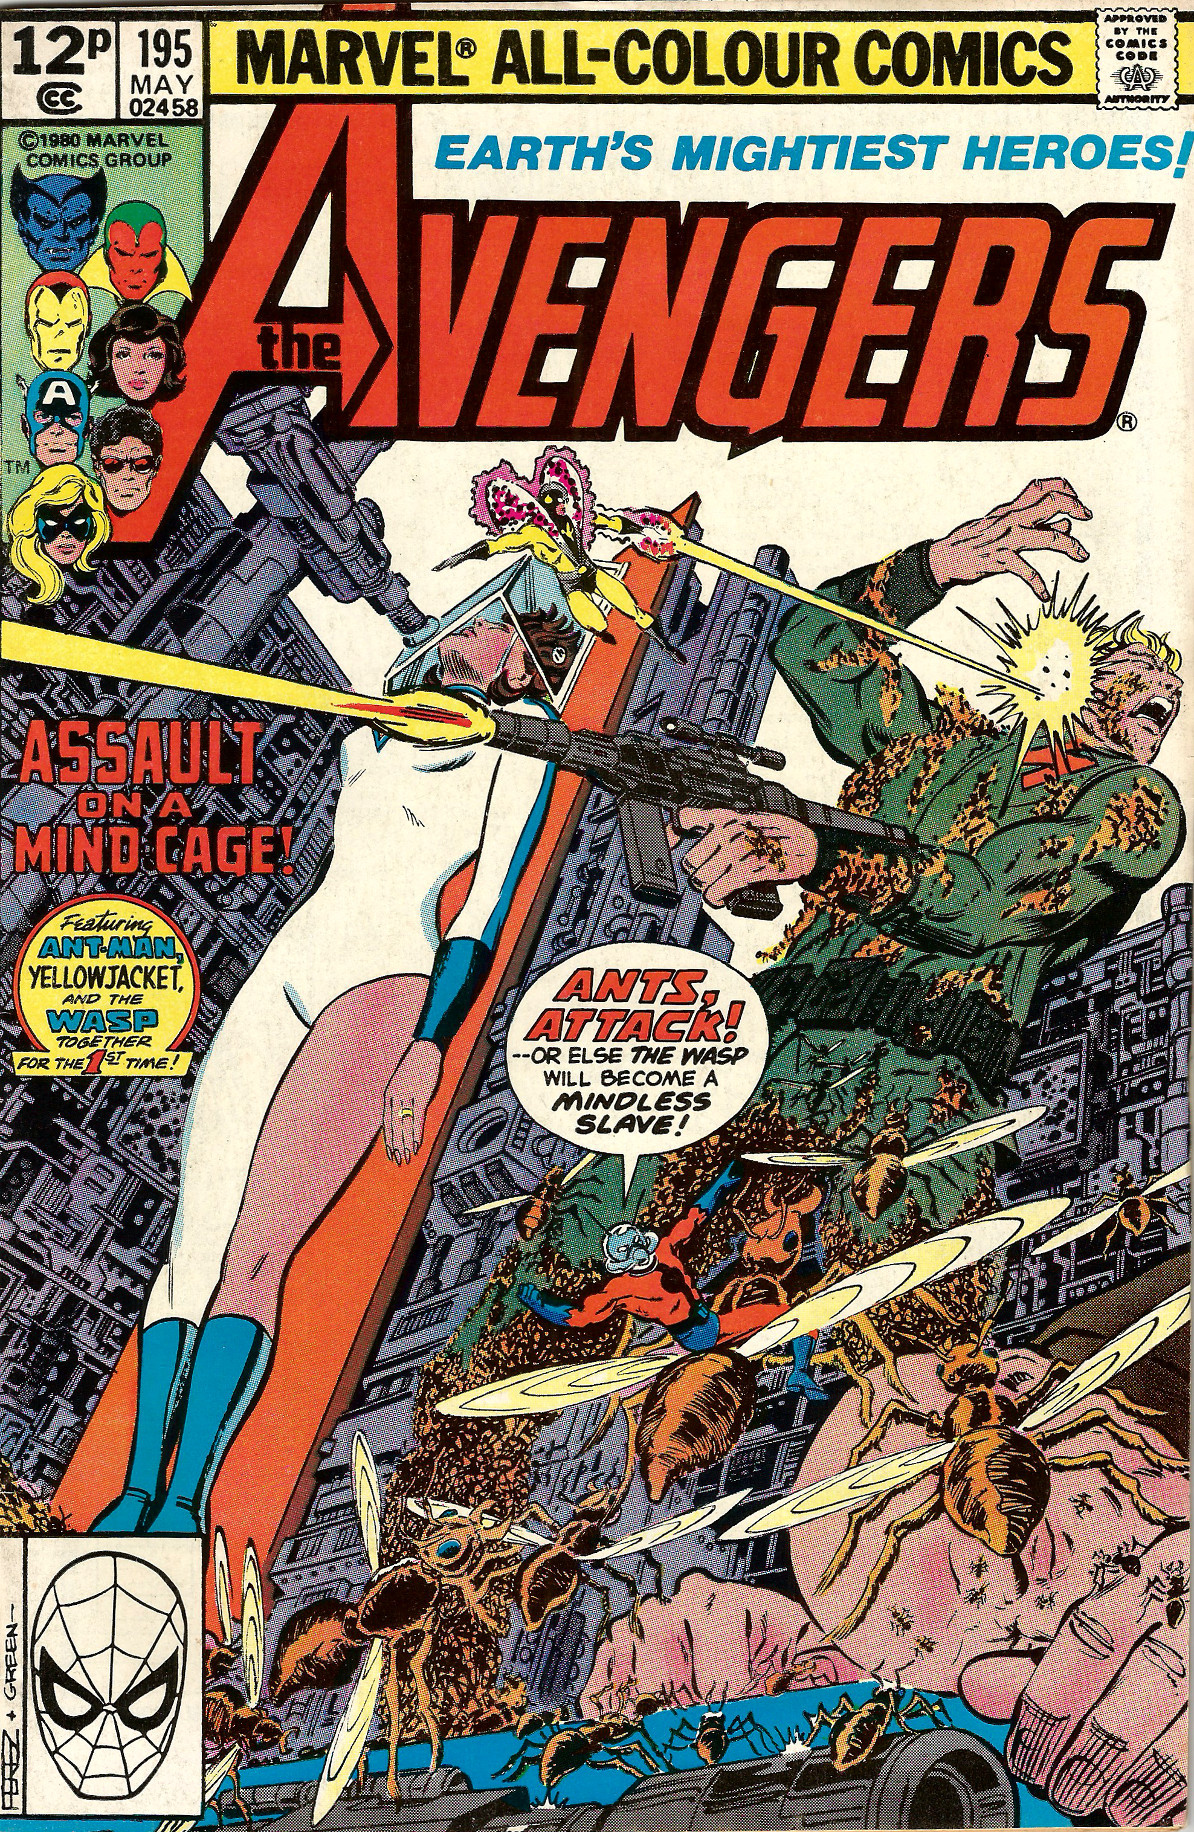 Avengers No. 195 (Marvel Comics, 1977). Cover art by George Perez and Dan Green.